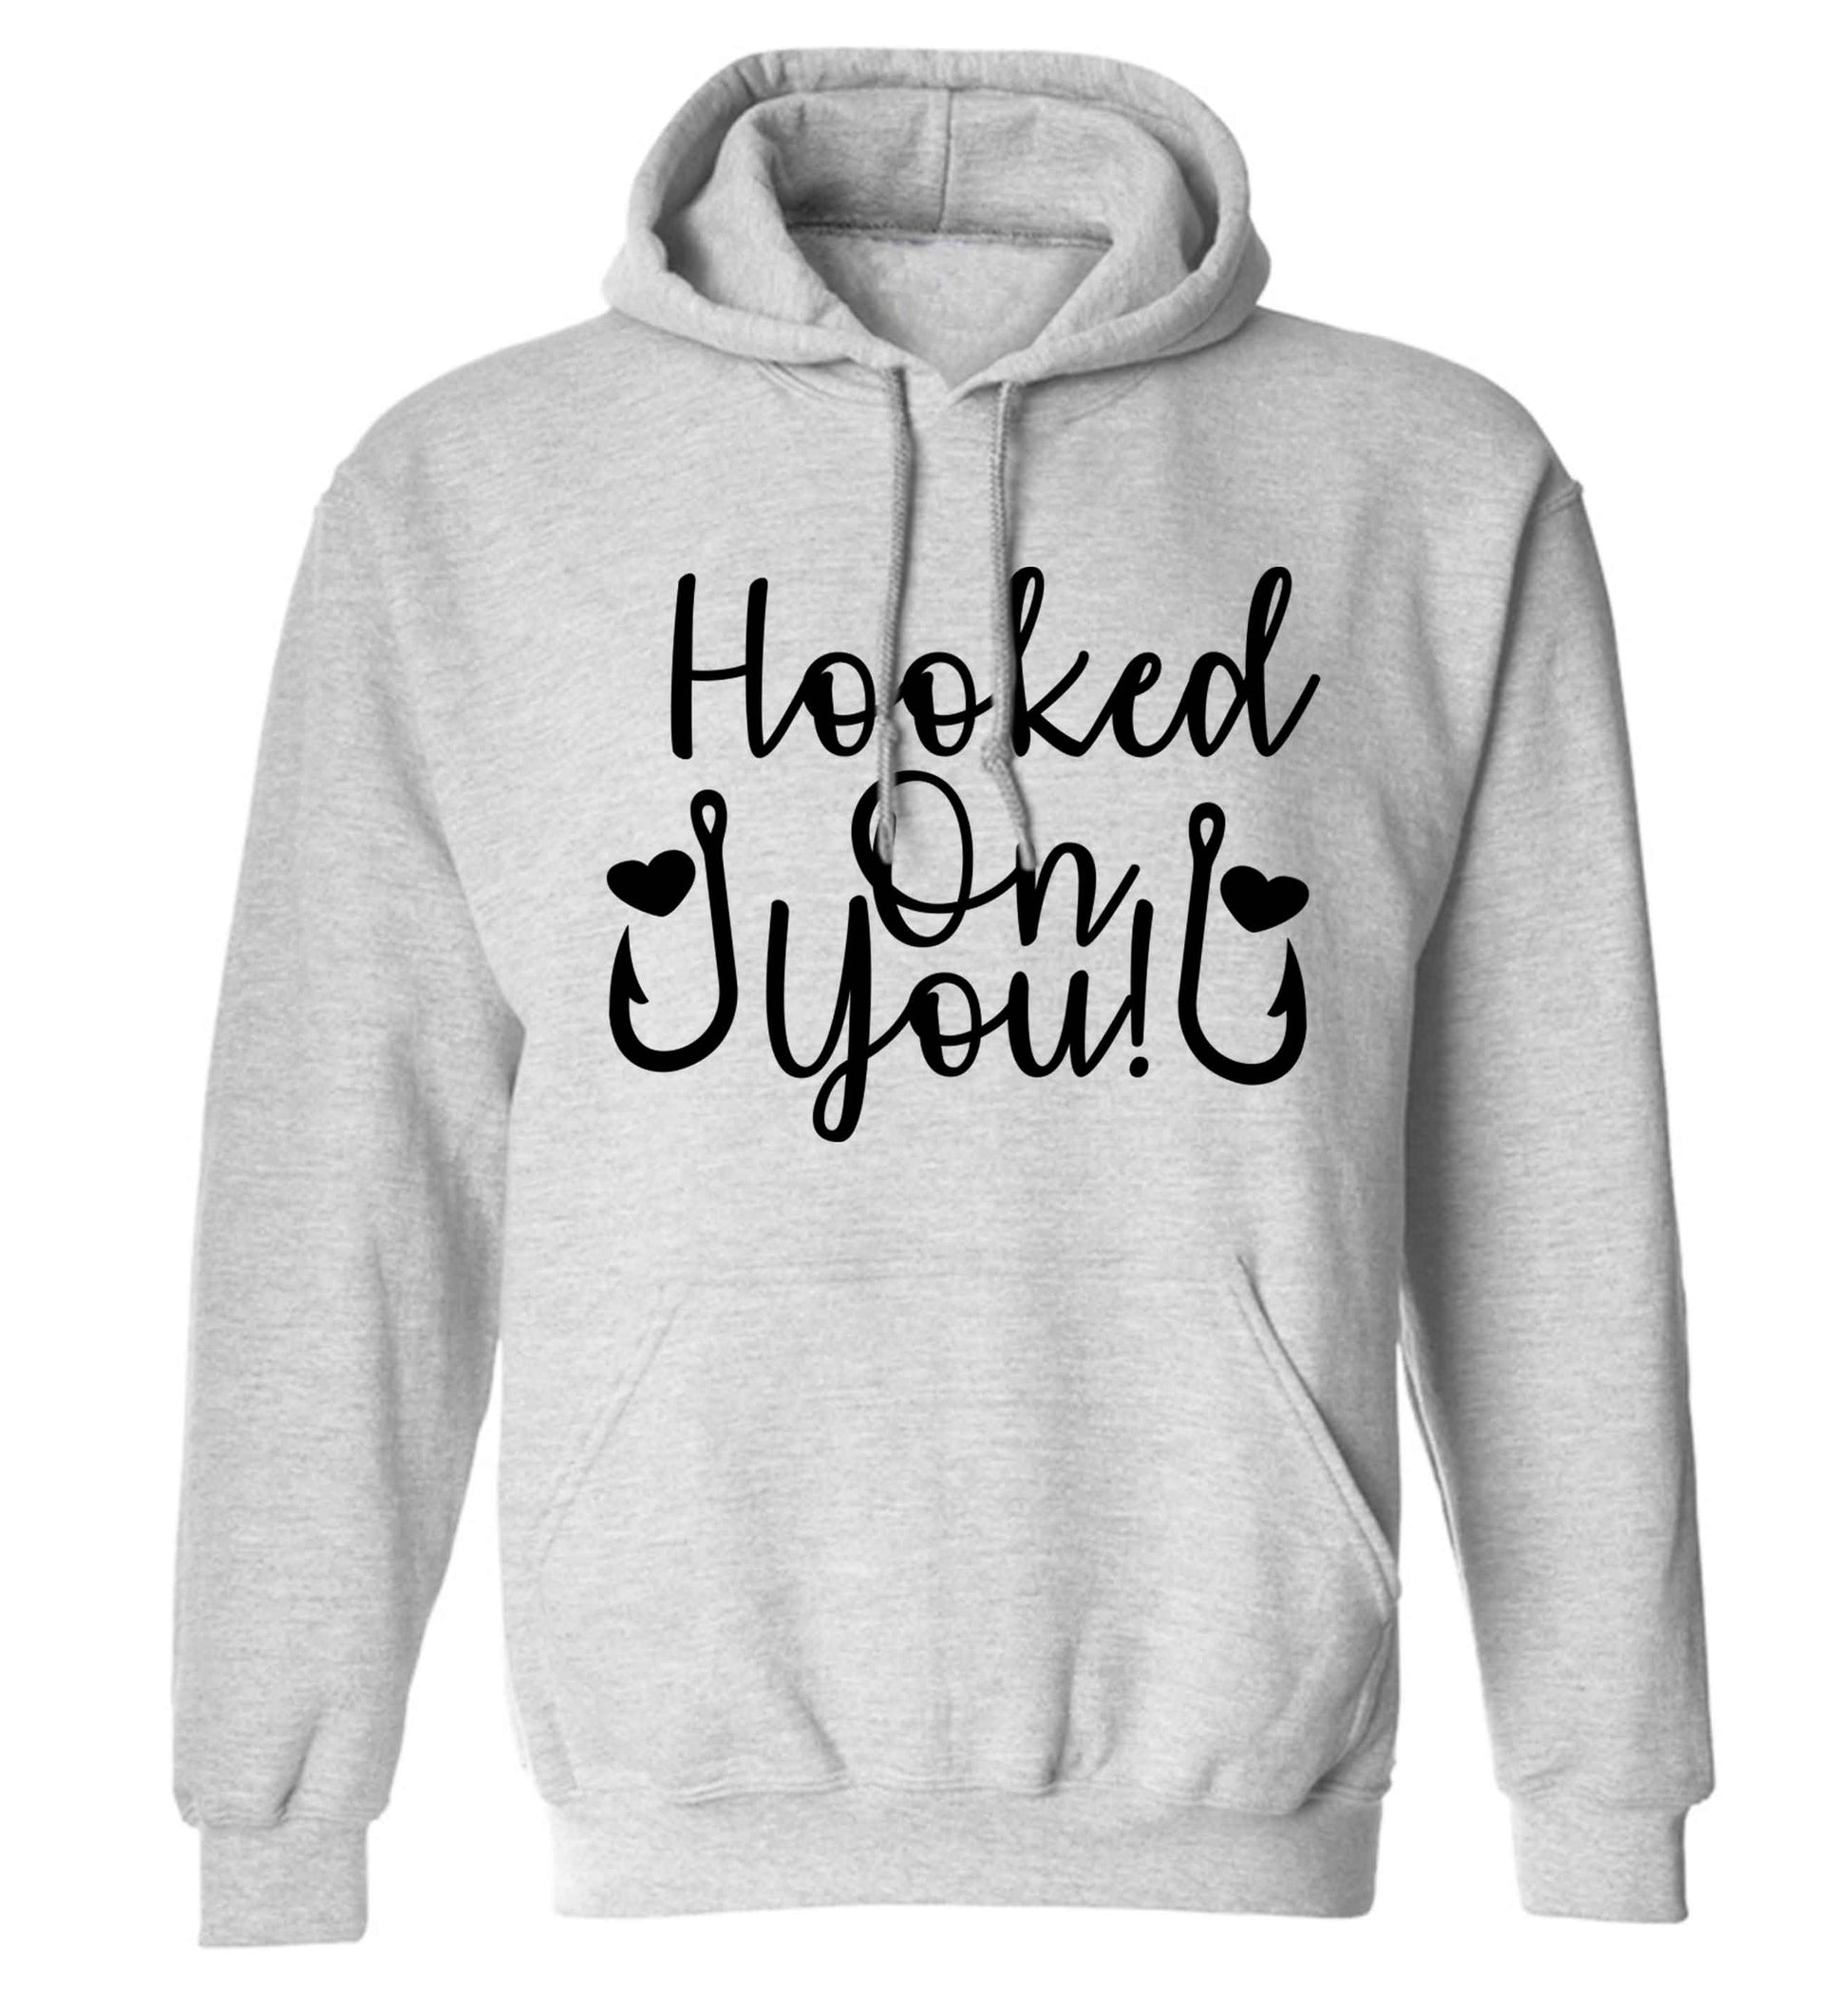 Hooked on you adults unisex grey hoodie 2XL